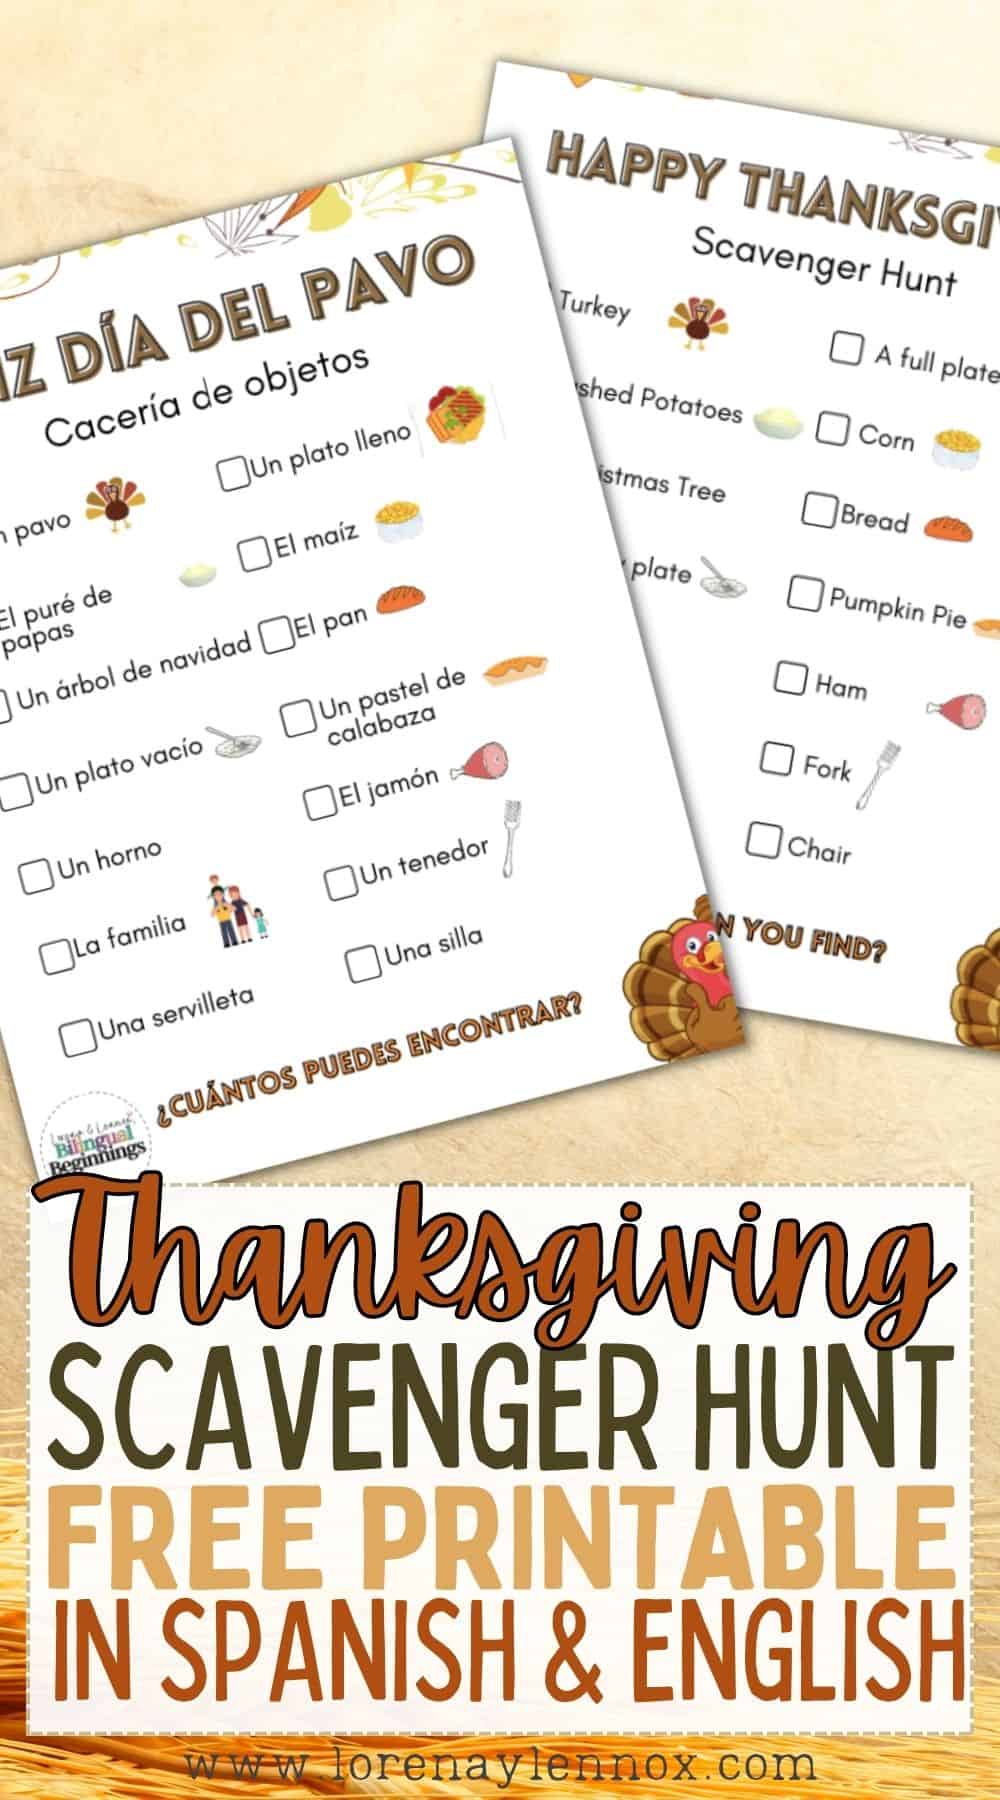 Printable Thanksgiving Scavenger Hunt in Spanish and English